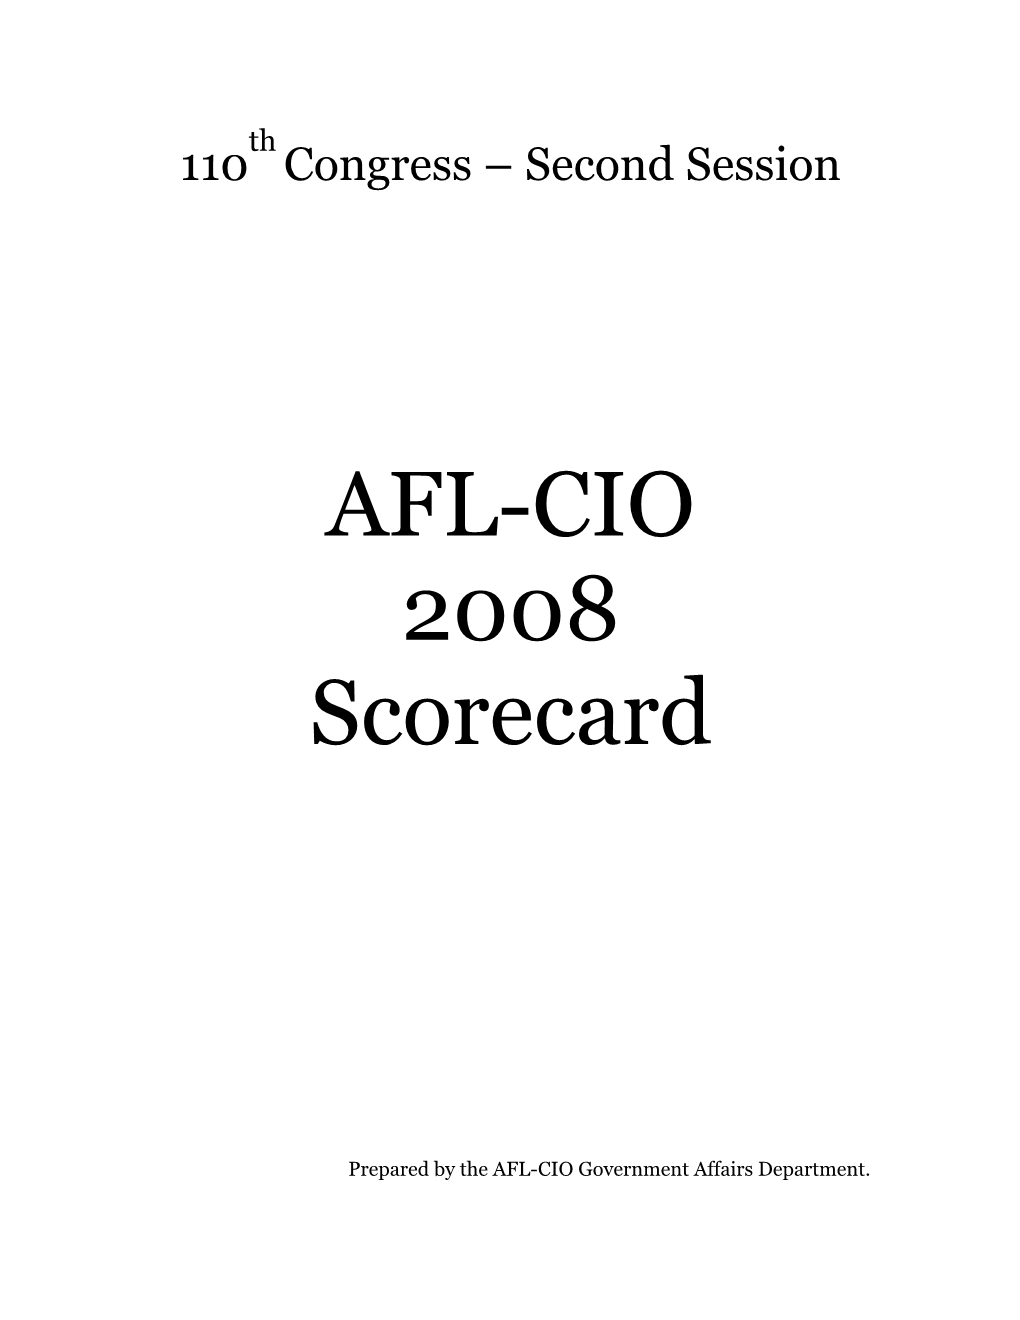 110 Congress – Second Session